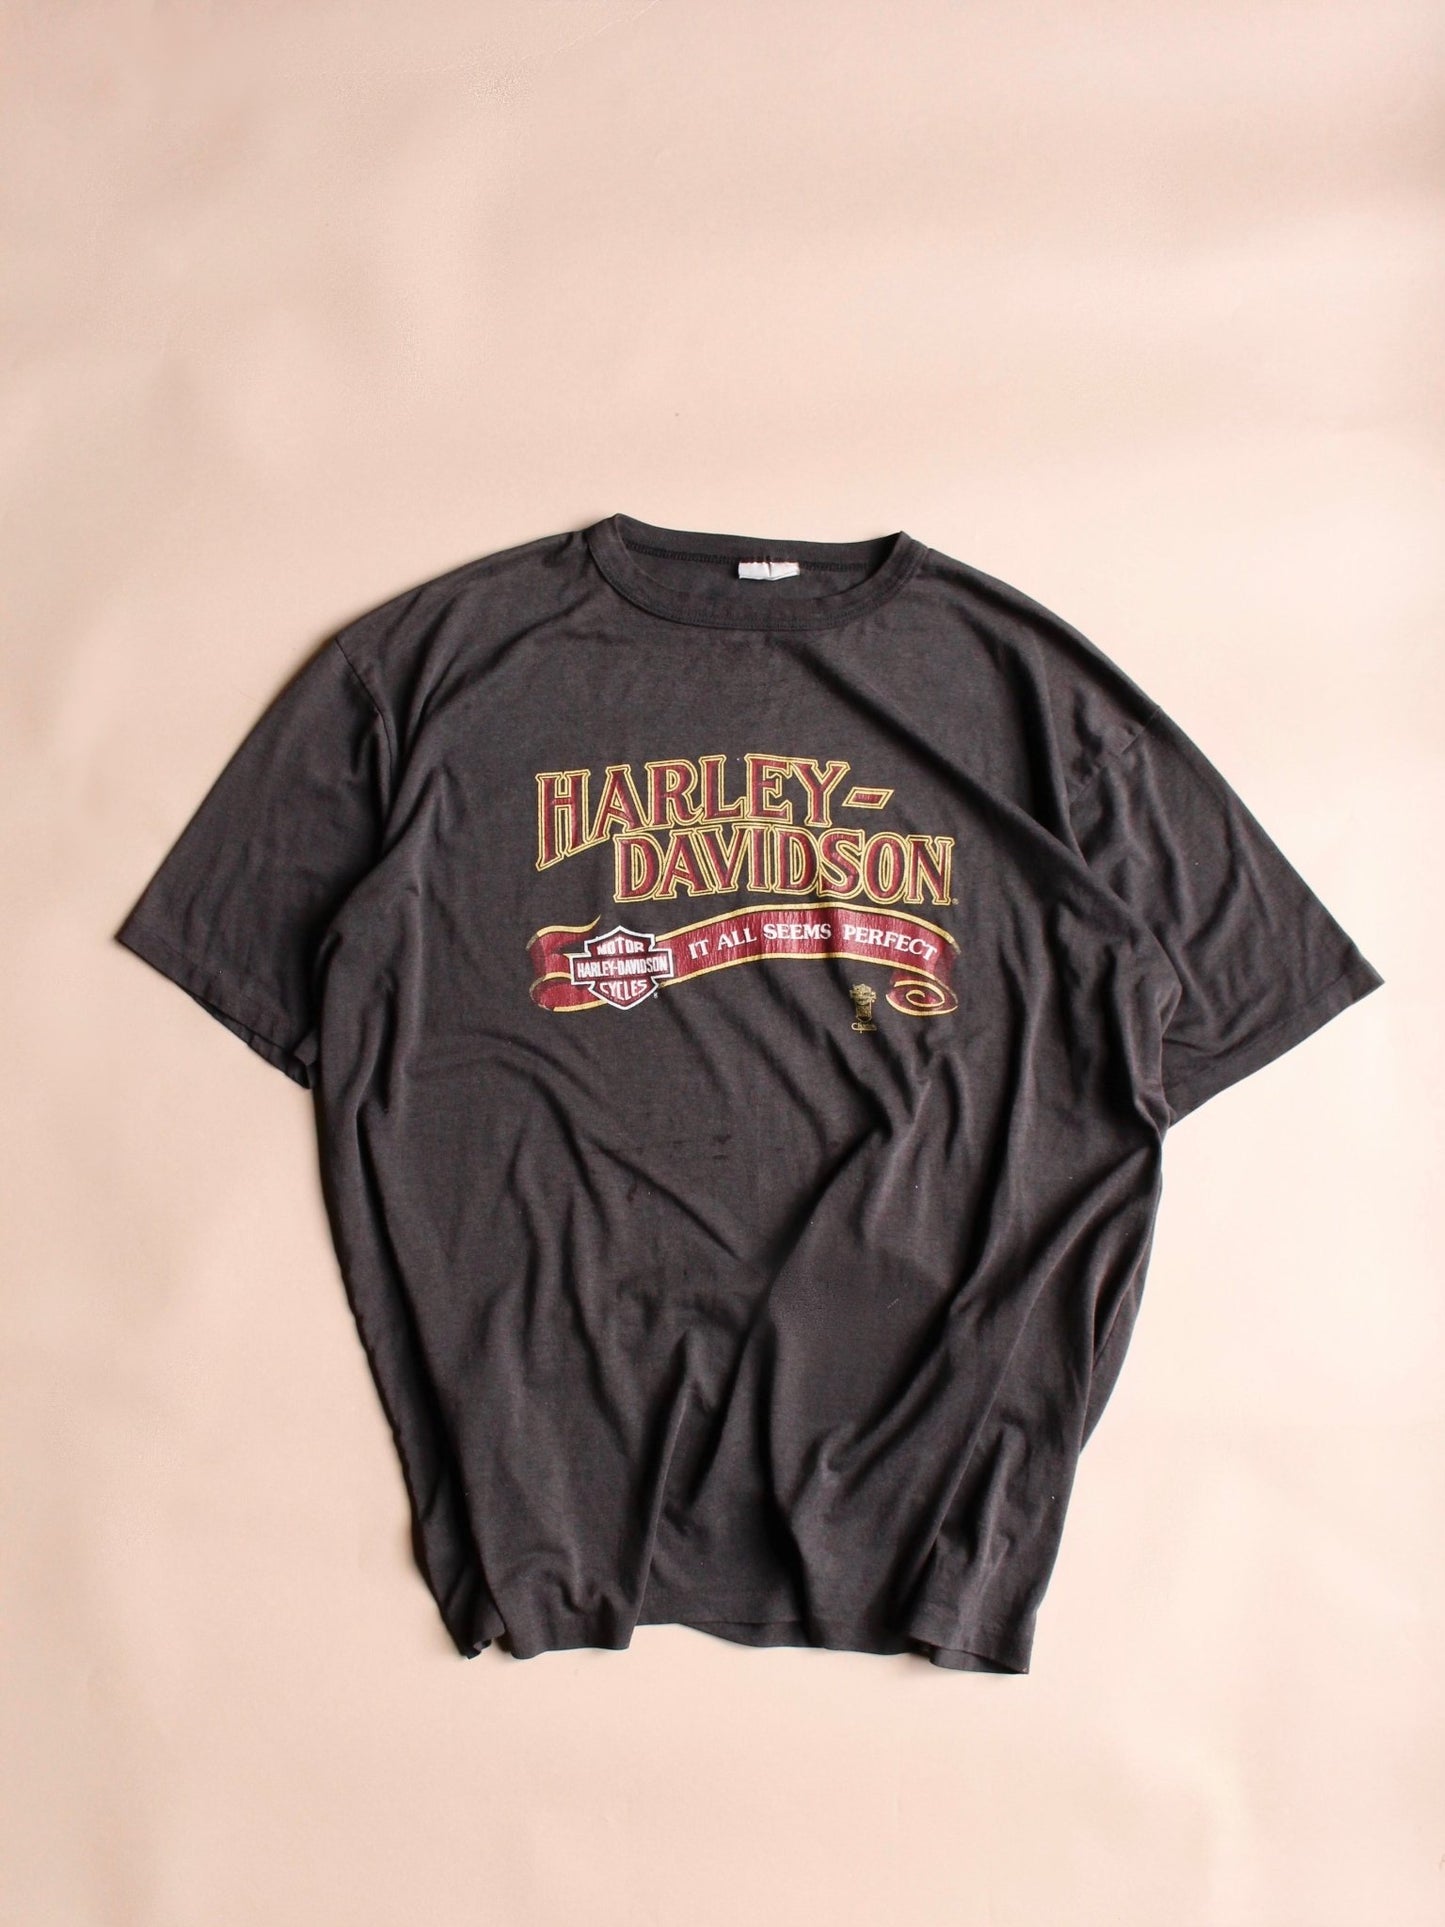 1980s Harley Davidson “It all seems perfect” tee